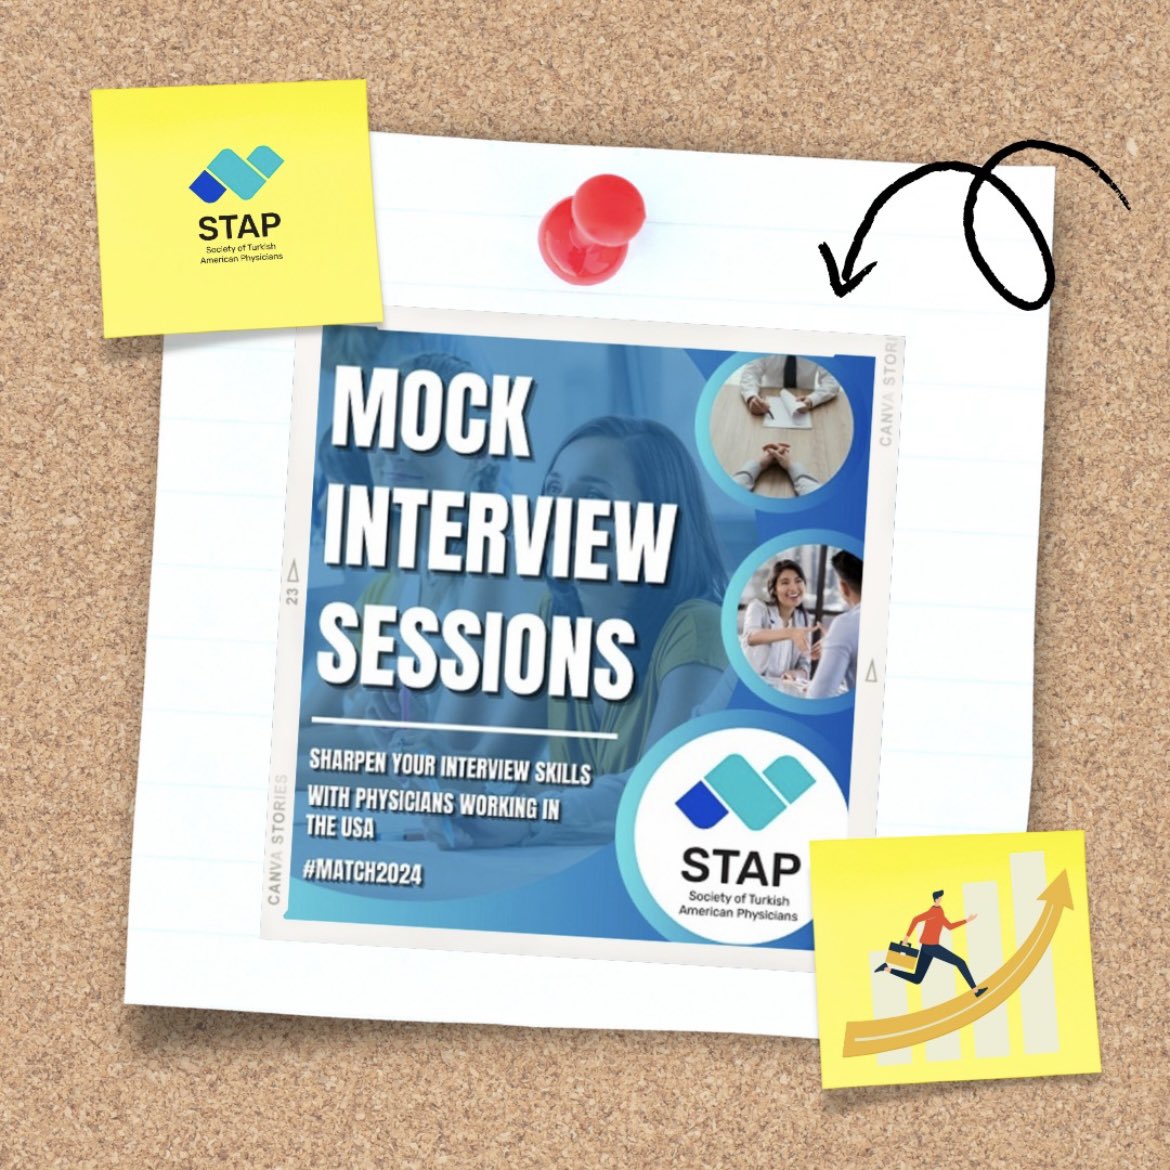 We are thrilled to announce that MATCH 2024 went very well for STAP members who leveled up their interview process after practicing with a US physician who’s been there done that! We invite everyone to be part of our success in MATCH 2025.
 #Matched #Match24 #mockinterviews #STAP